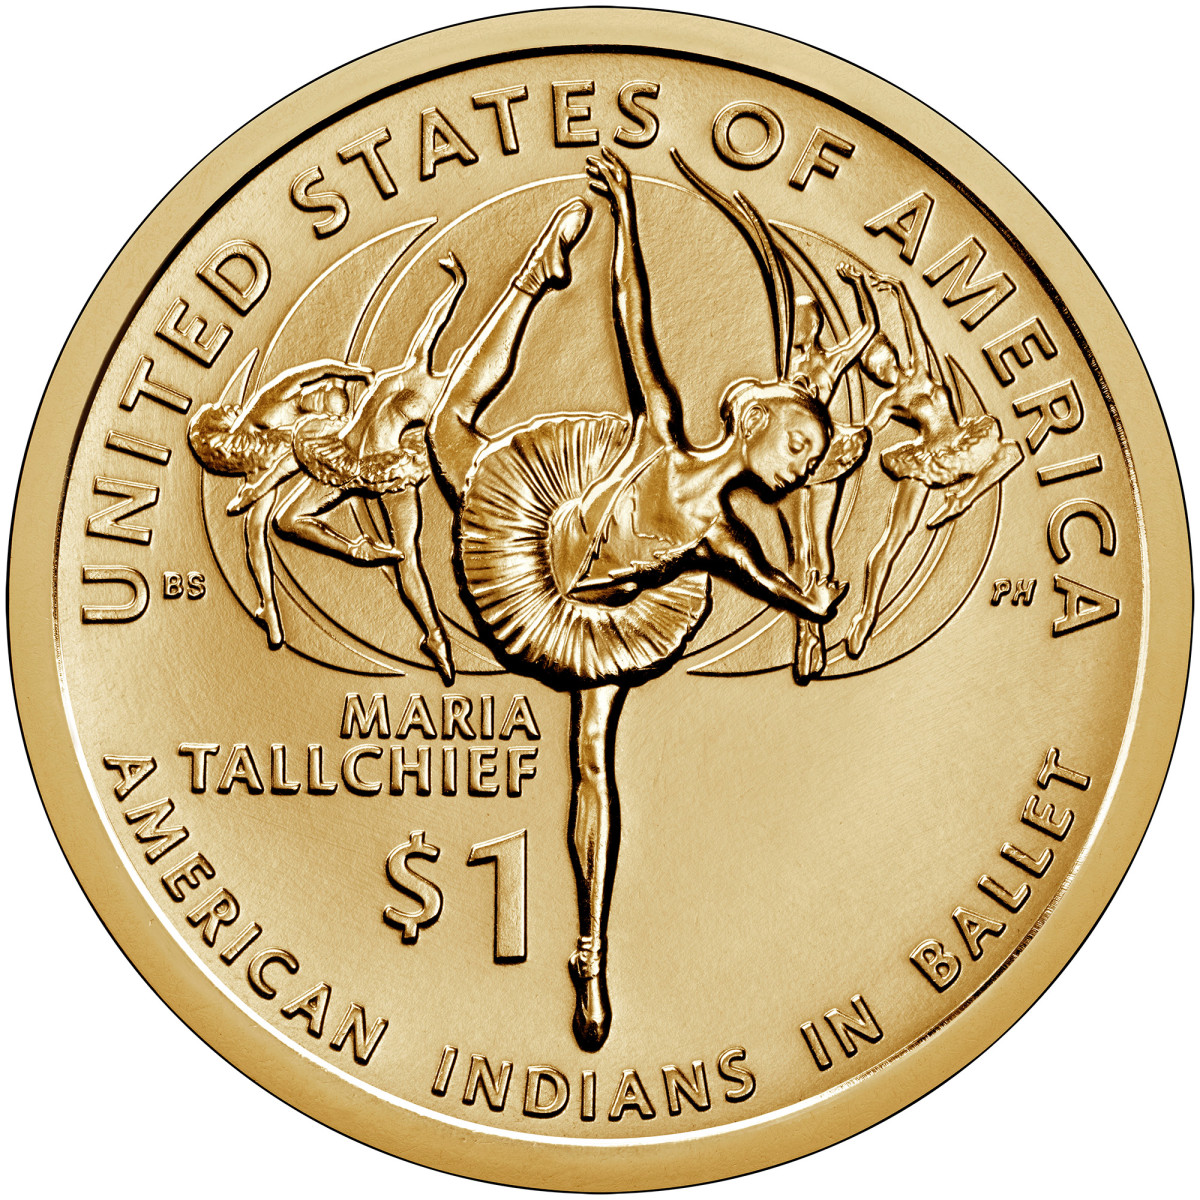 Ballerina Maria Tallchief is the subject of the 2023 Native American dollar reverse design. (Image courtesy United States Mint.)